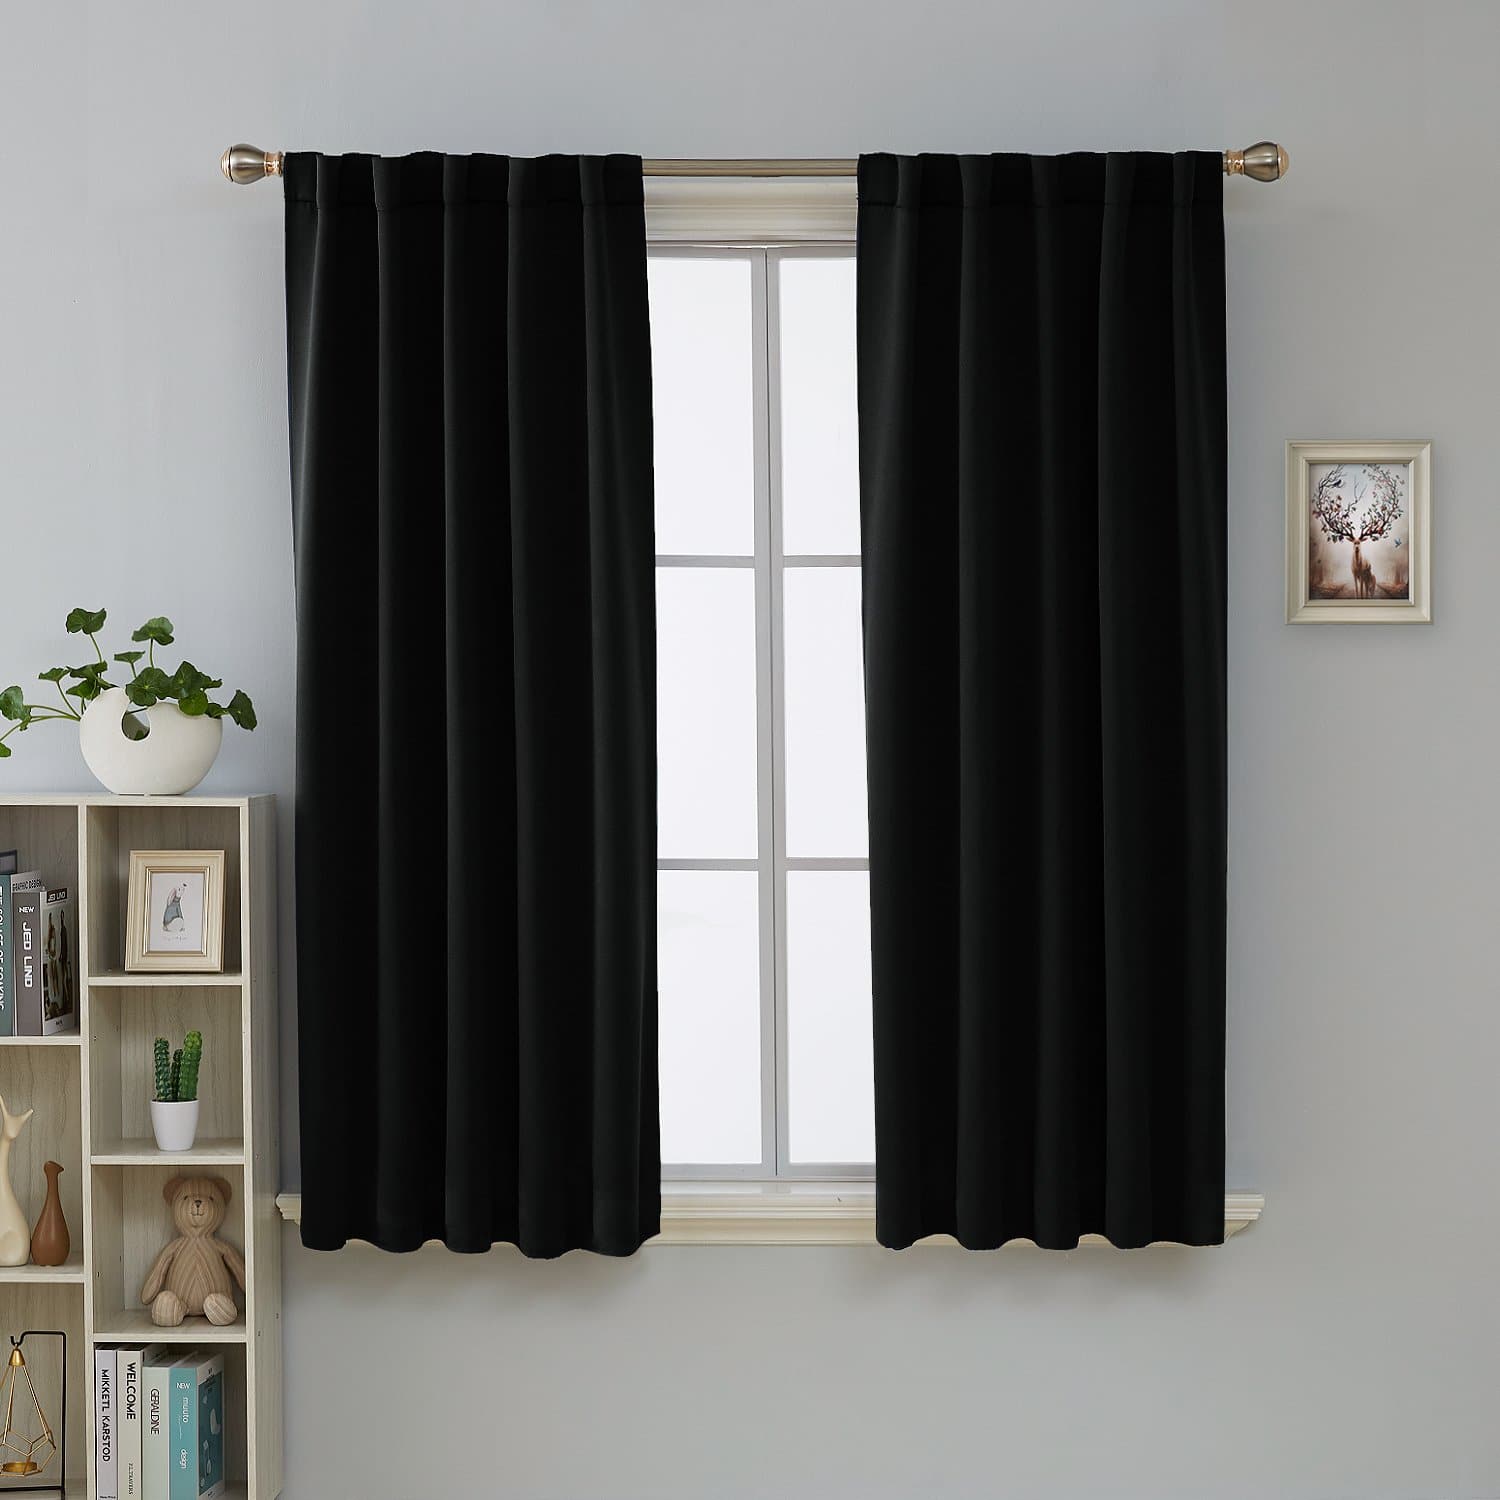 Top 10 Best Blackout Curtains in 2020 Reviews | Buyer's Guide